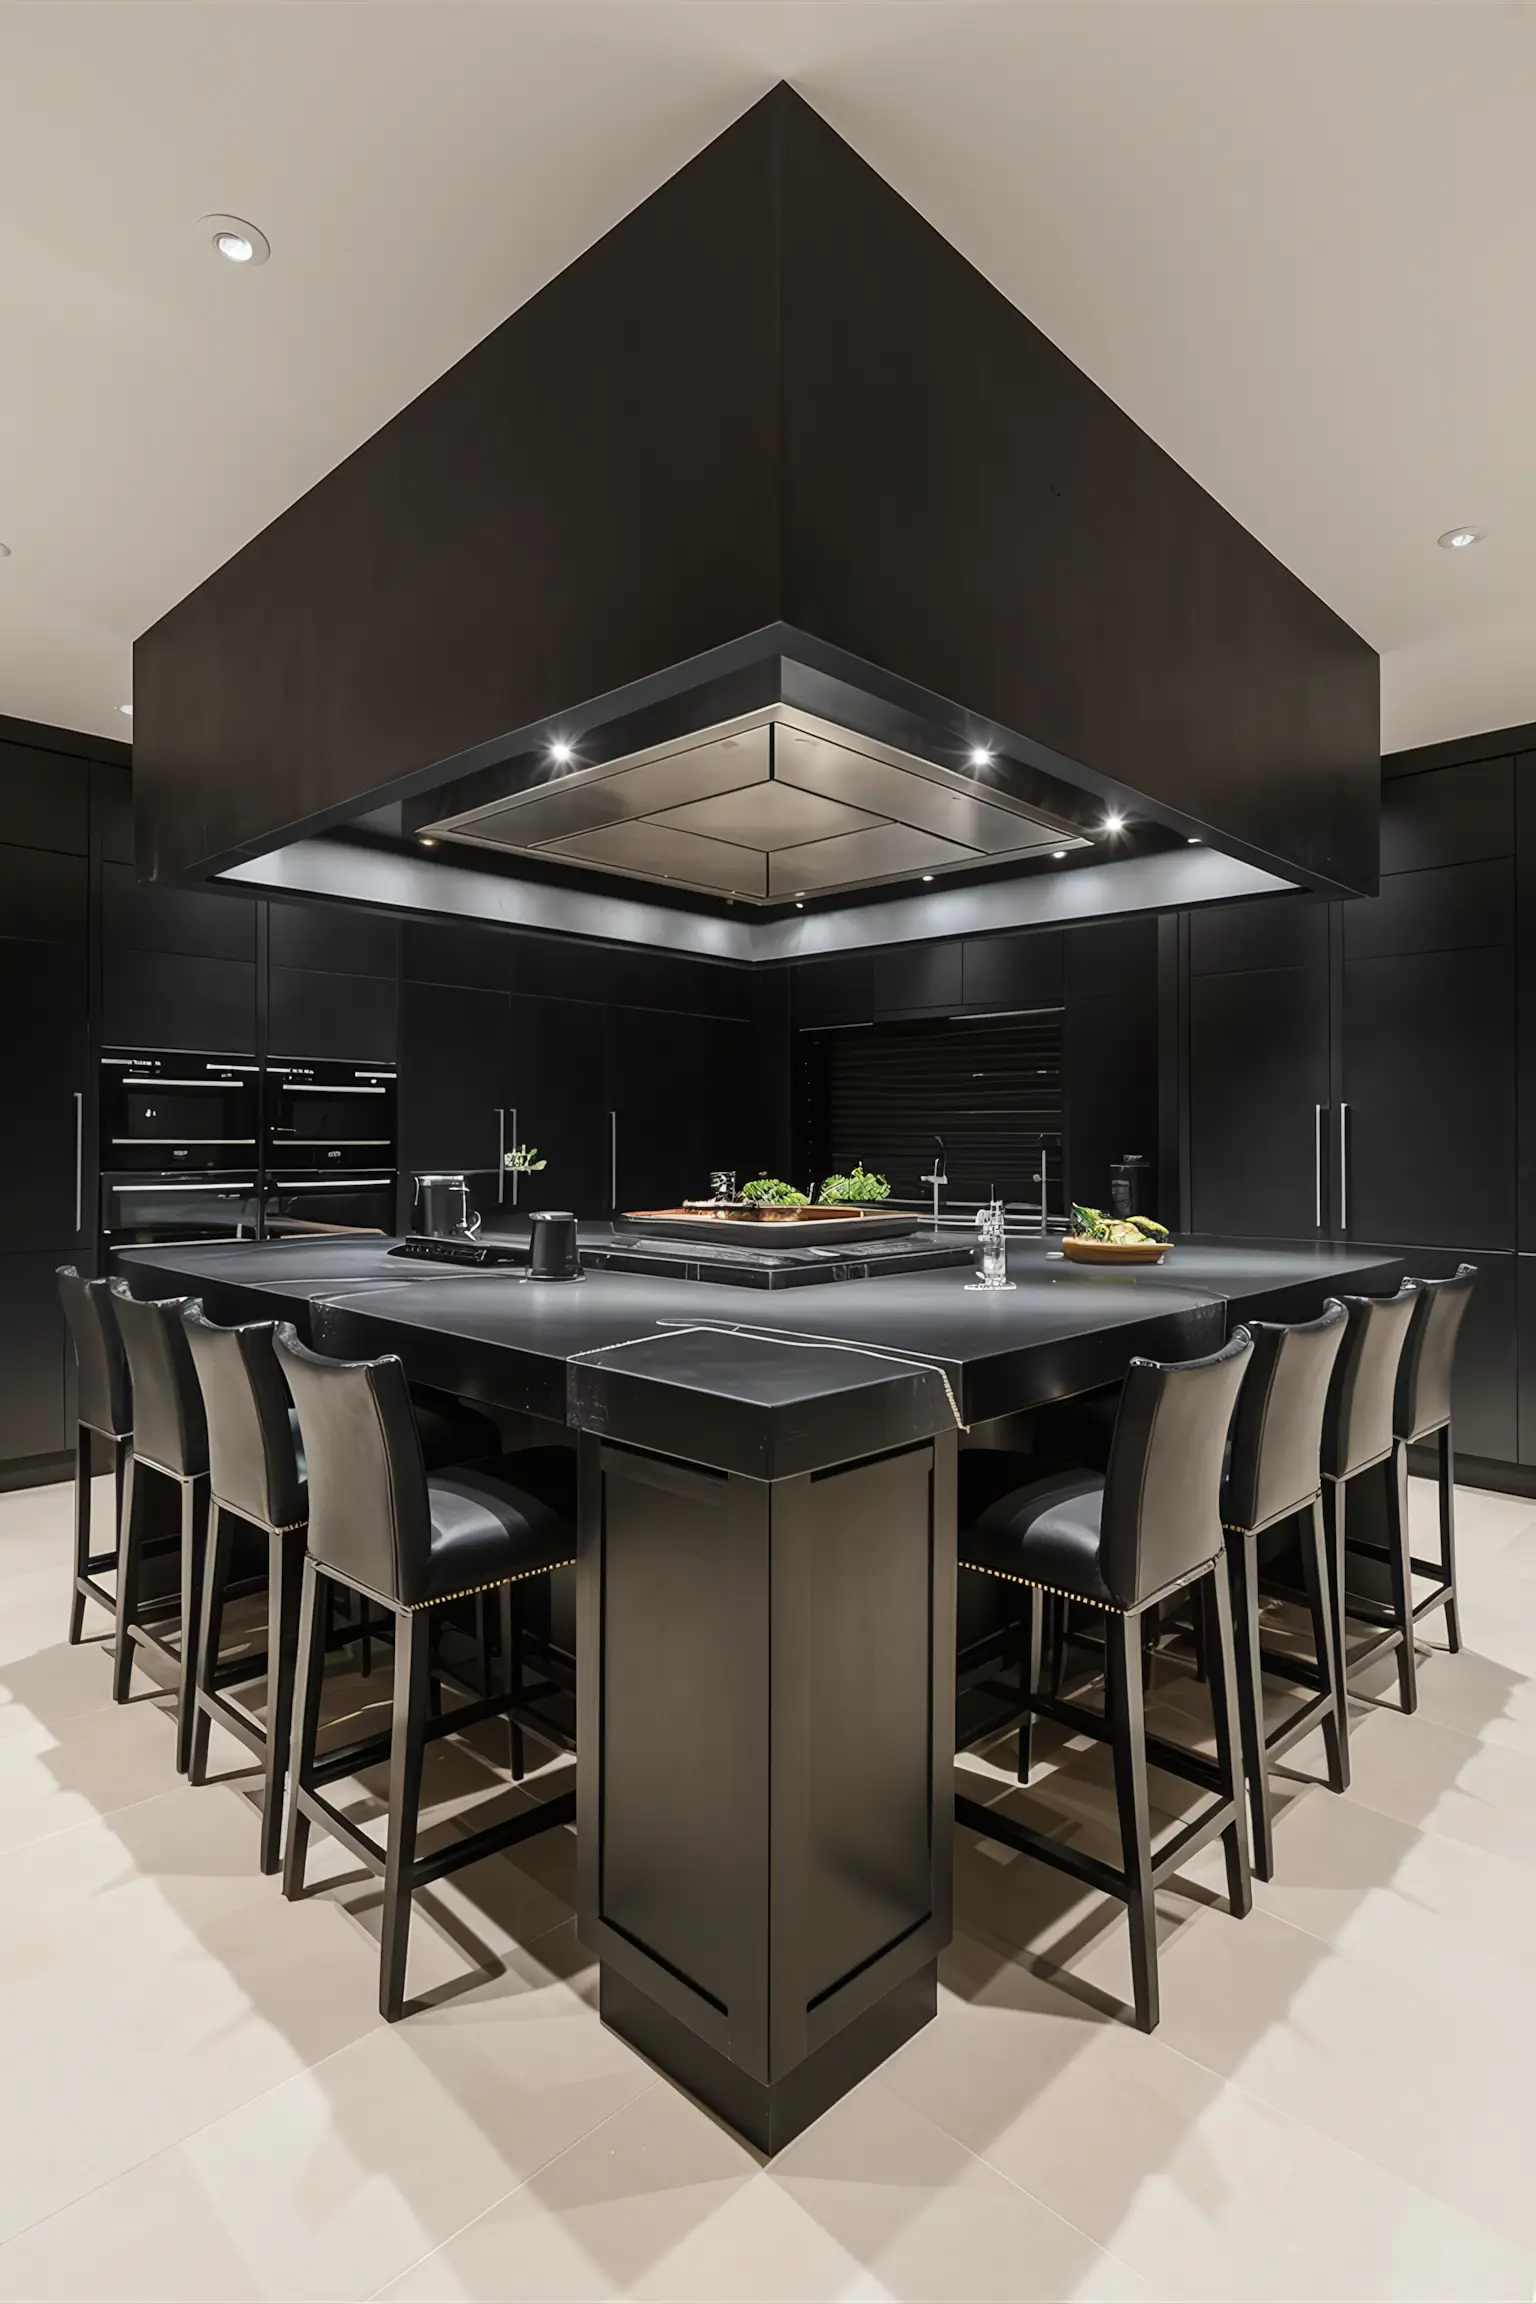 Black kitchen with a large central island featuring seating, storage, and a built-in sink.